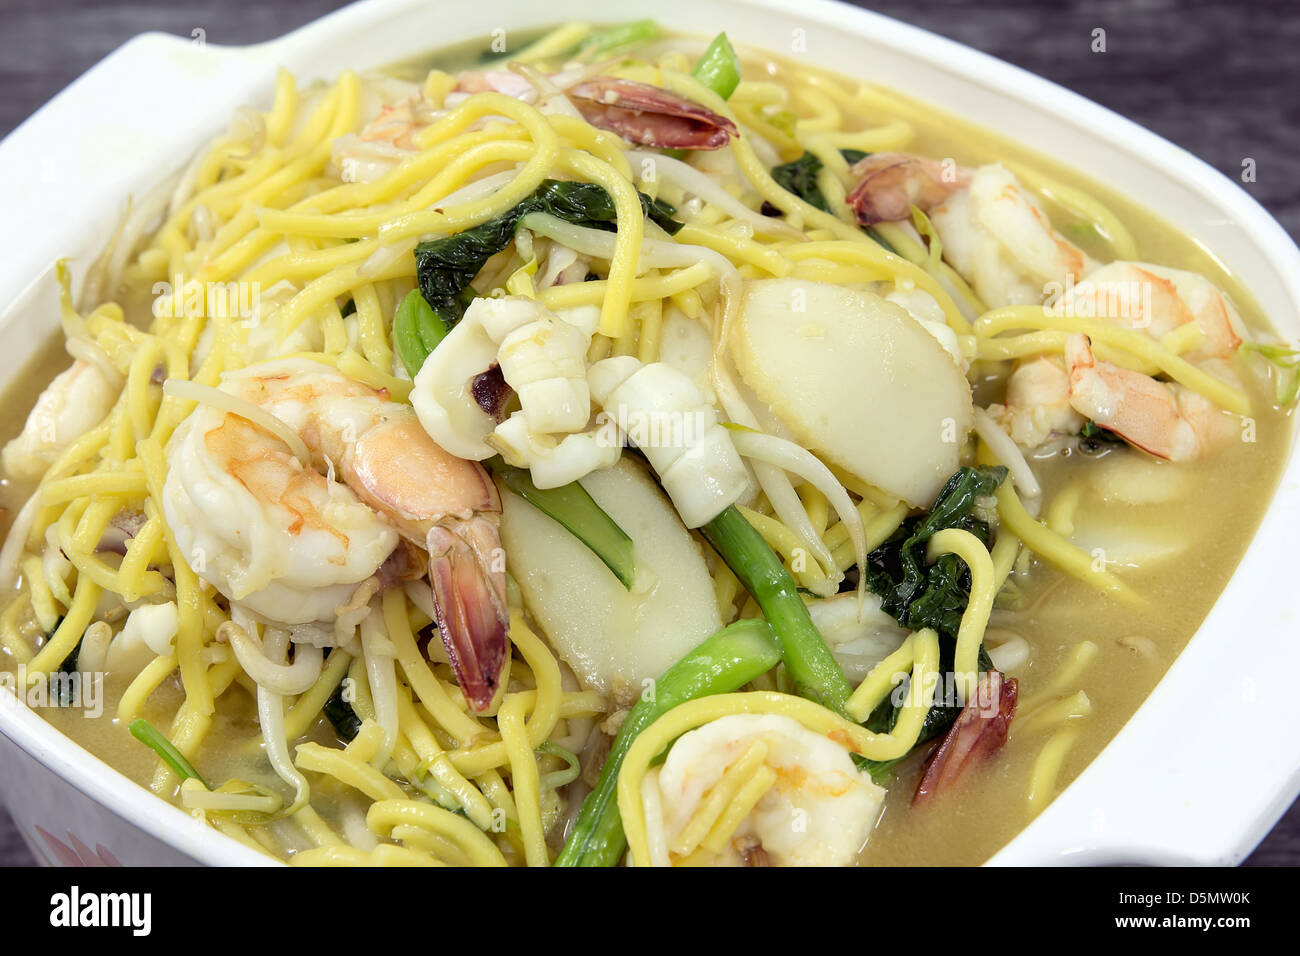 Hokkien Mee Stir Fry Yellow Noodles with Prawns Squids Fishcake and Green Vegetables Top View Closeup Stock Photo